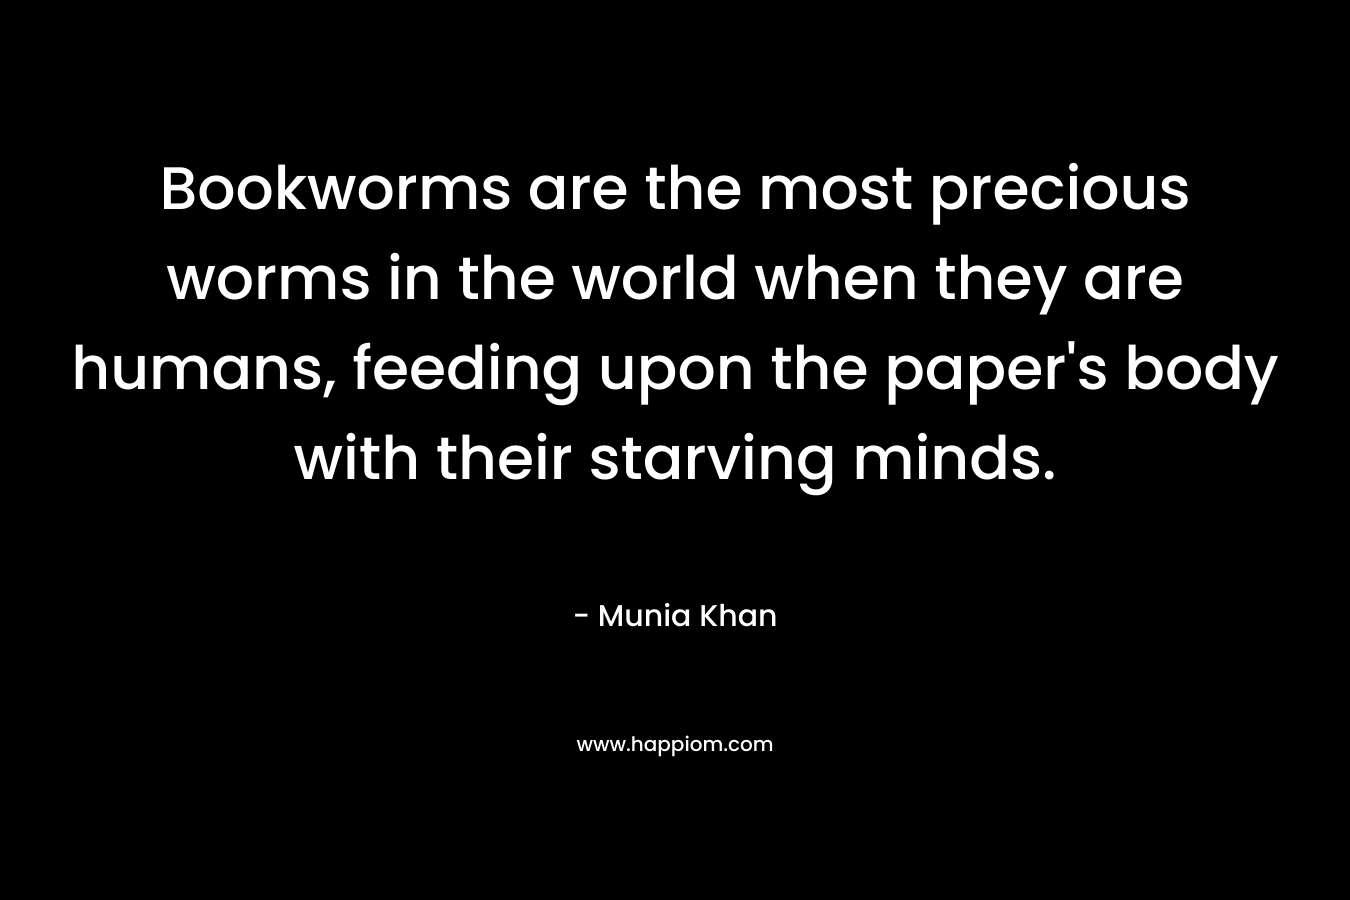 Bookworms are the most precious worms in the world when they are humans, feeding upon the paper’s body with their starving minds. – Munia Khan